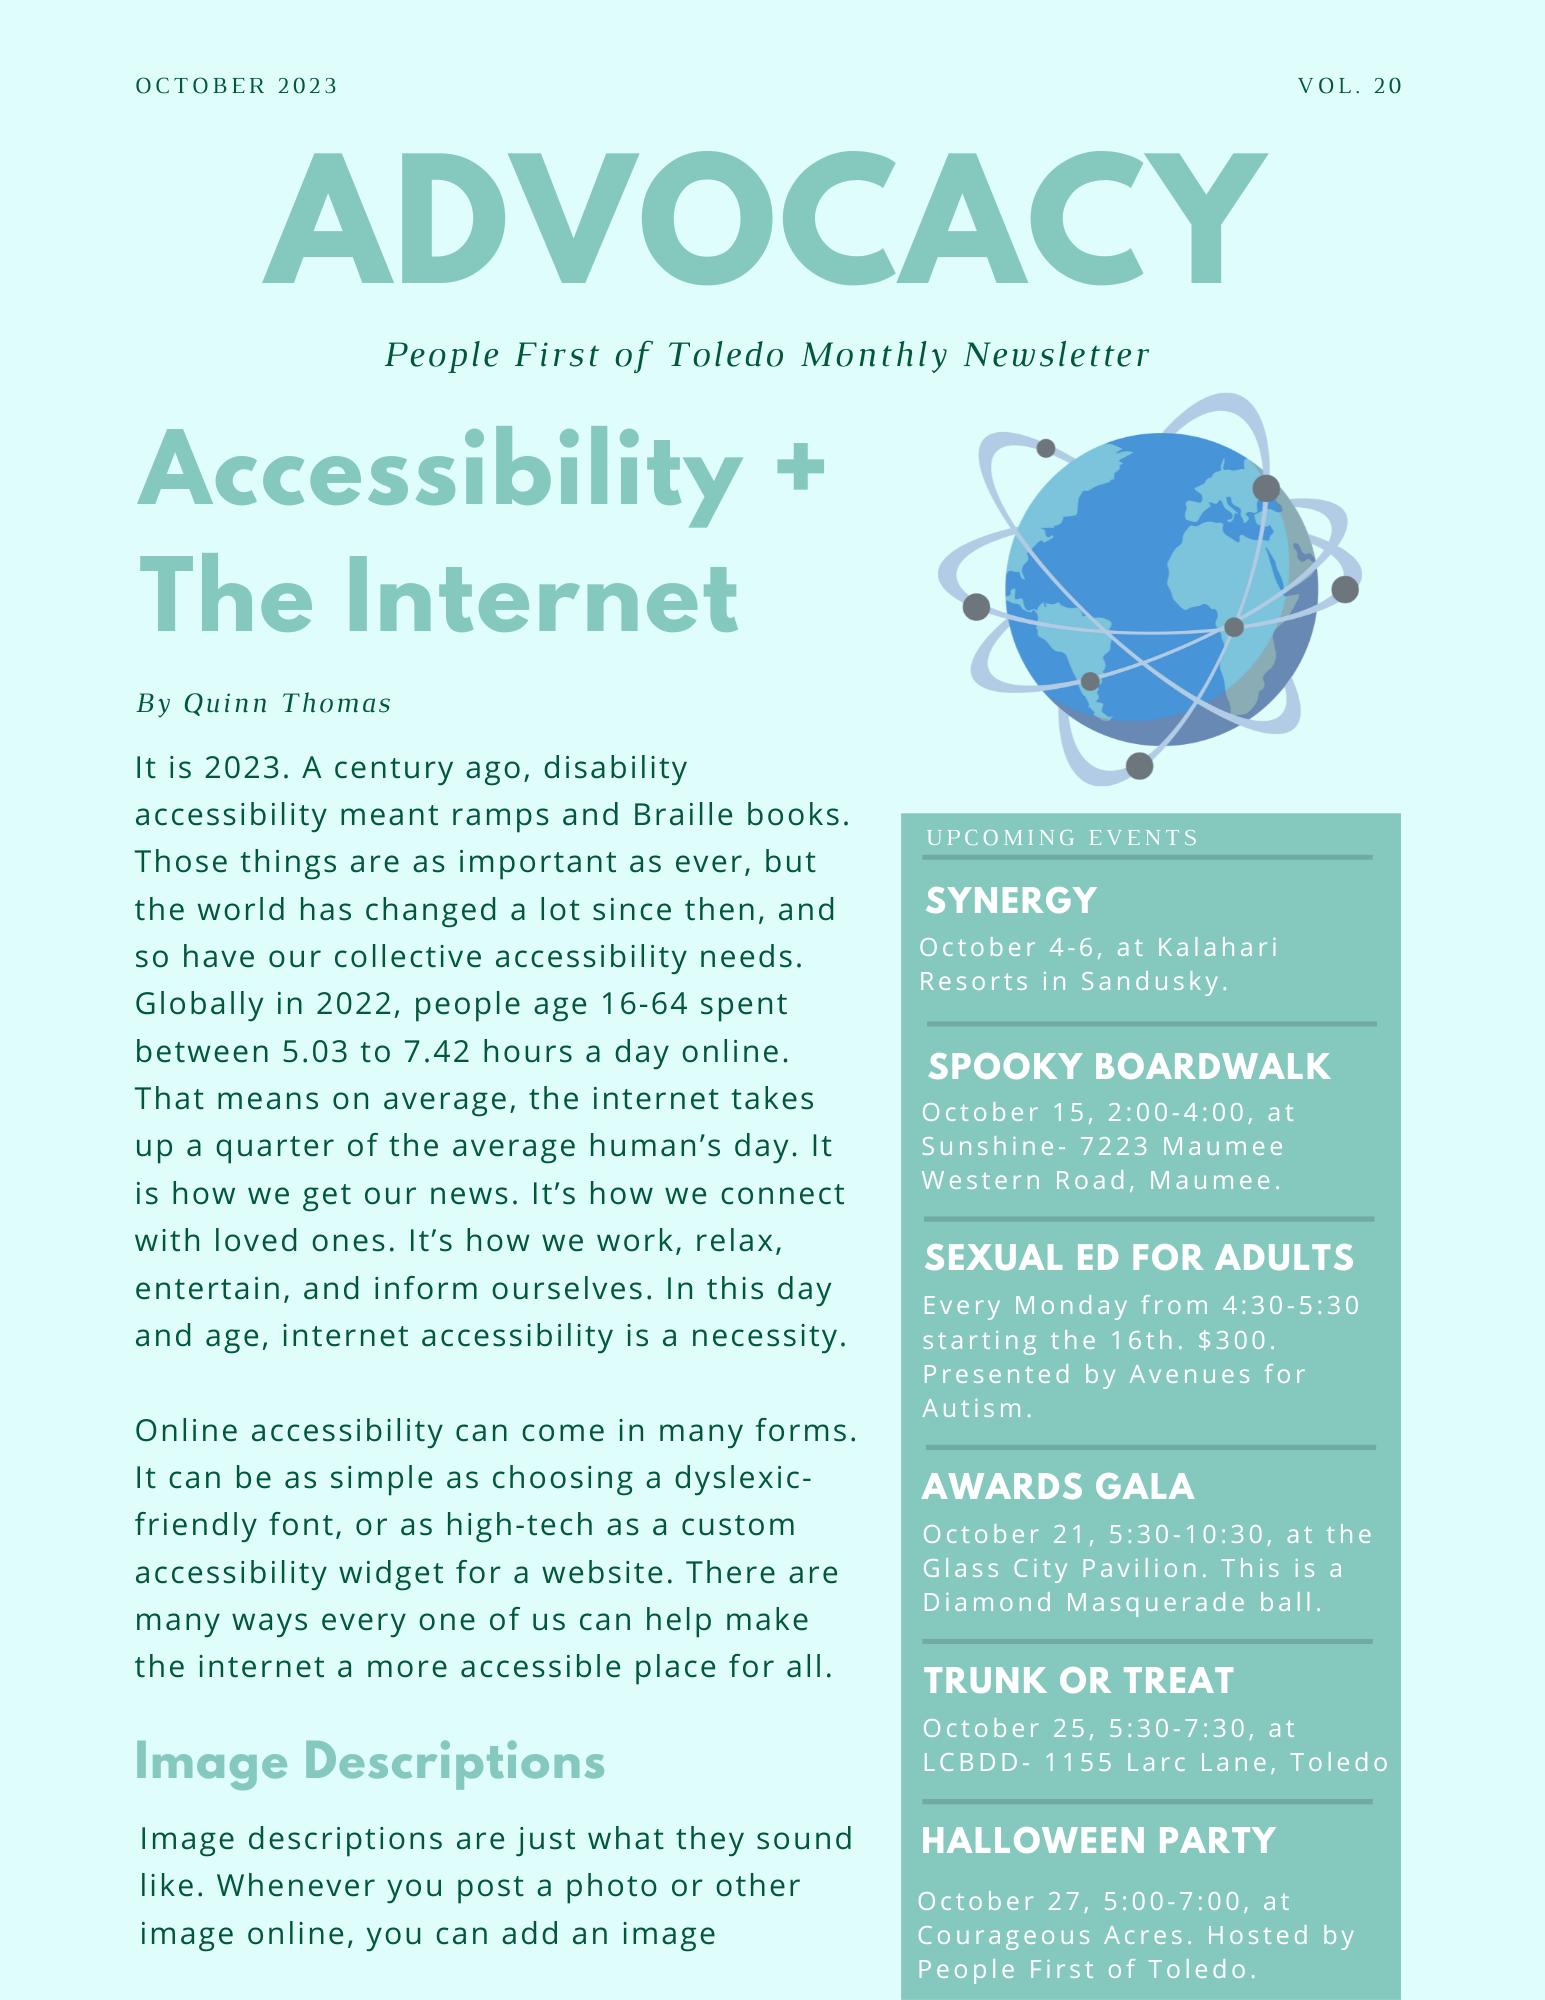 The front page of People First of Toledo's October 2023 advocacy newsletter. It is in shades of sea foam green.